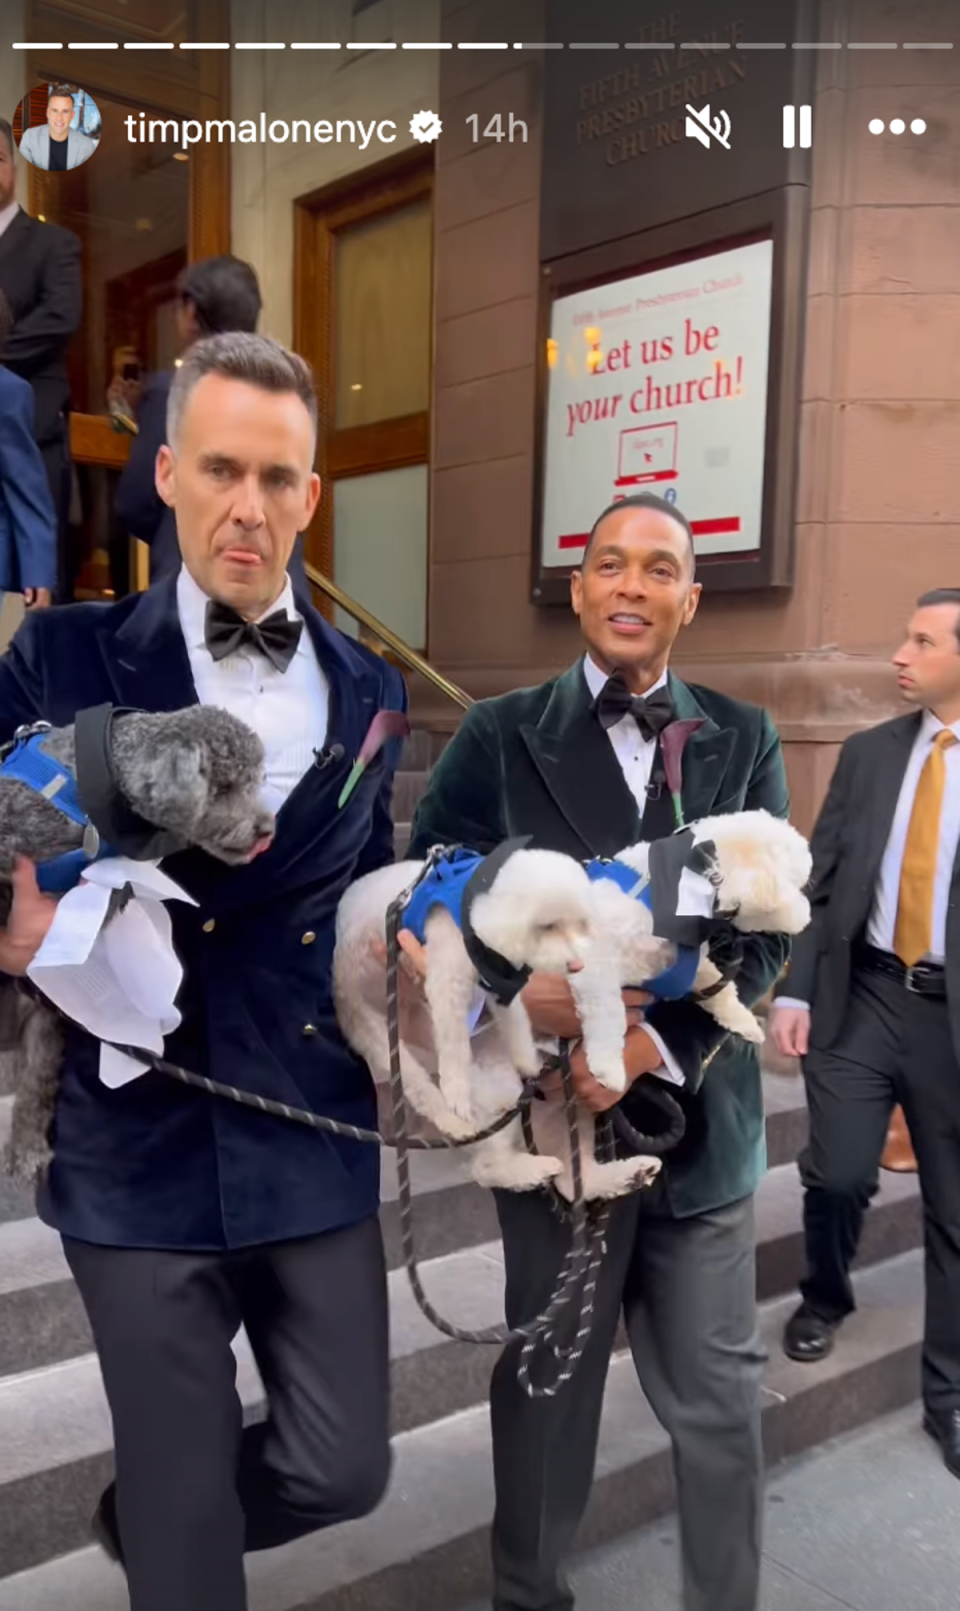 Tim Malone and Don Lemon holding their dogs as they exit the church (@timpmalonenyc on Instagram)